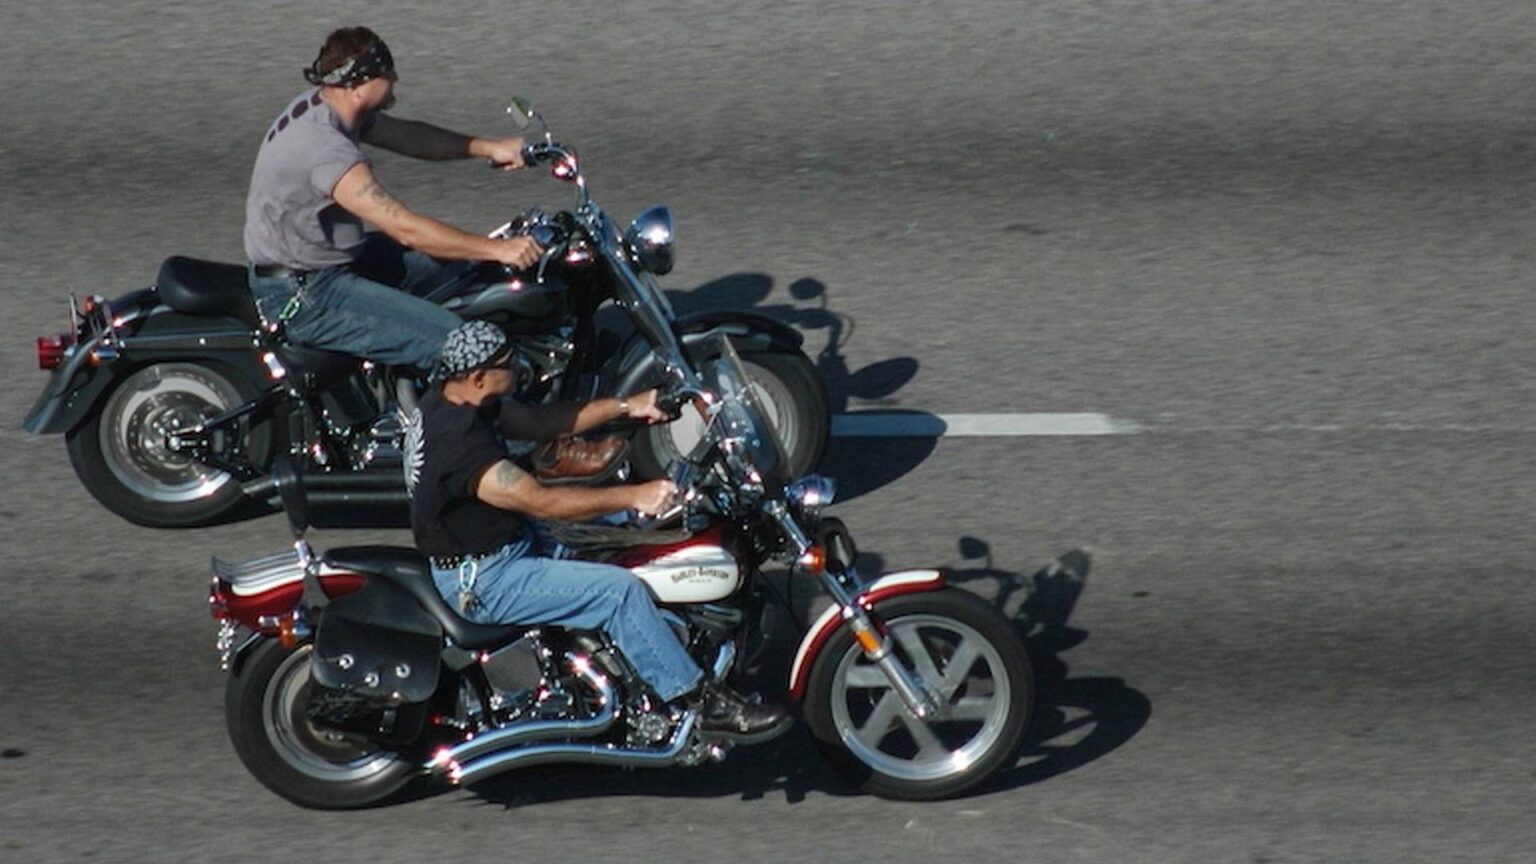 Does Florida Have a Motorcycle Helmet Law? - The GreatFlorida Insurance Blog